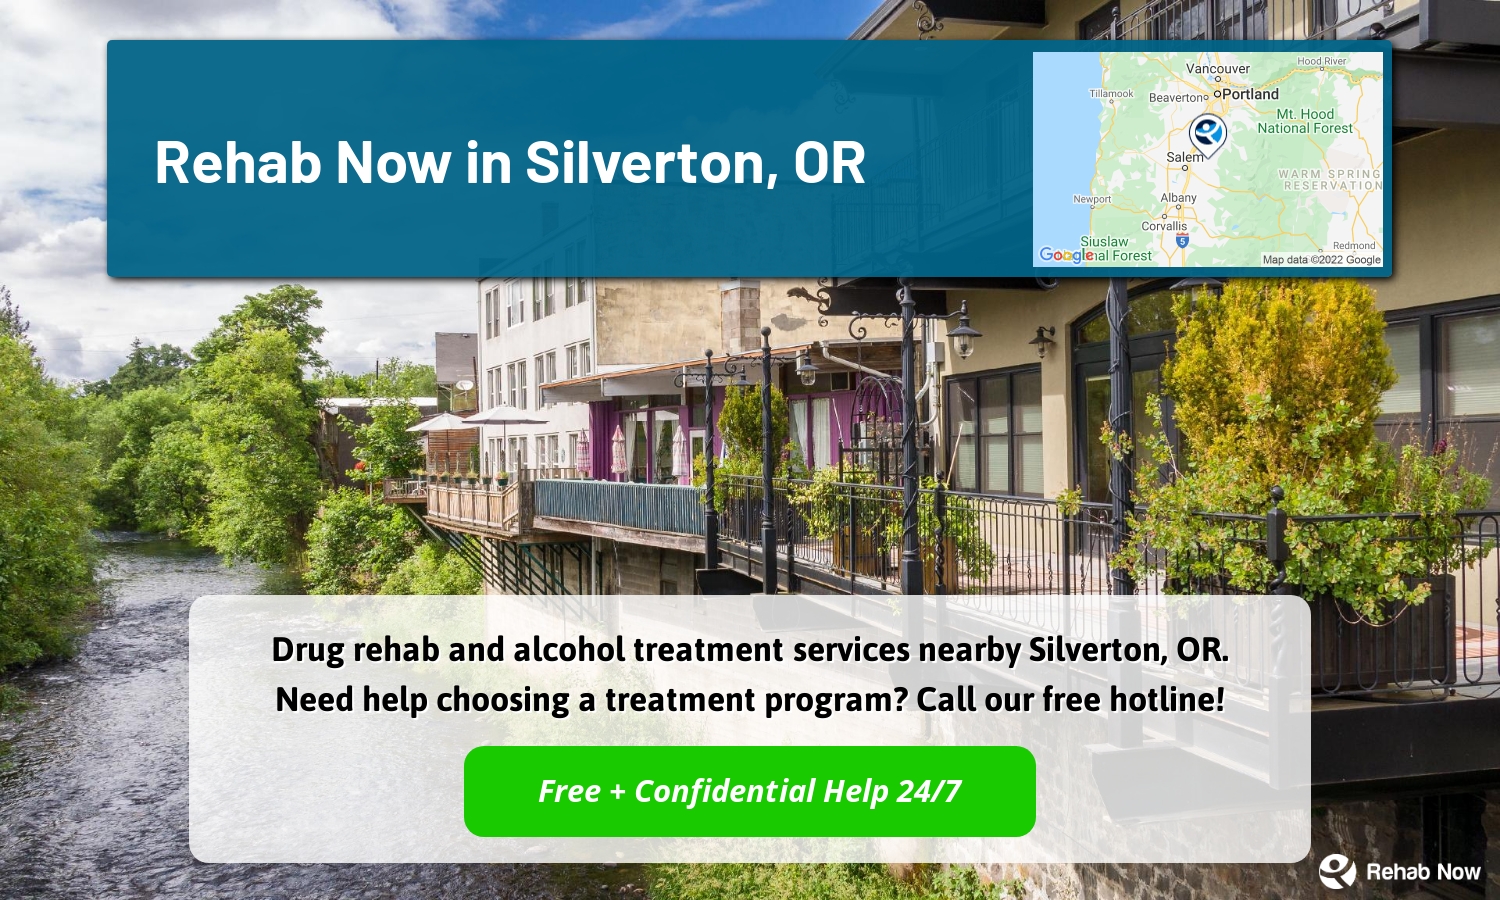 Drug rehab and alcohol treatment services nearby Silverton, OR. Need help choosing a treatment program? Call our free hotline!